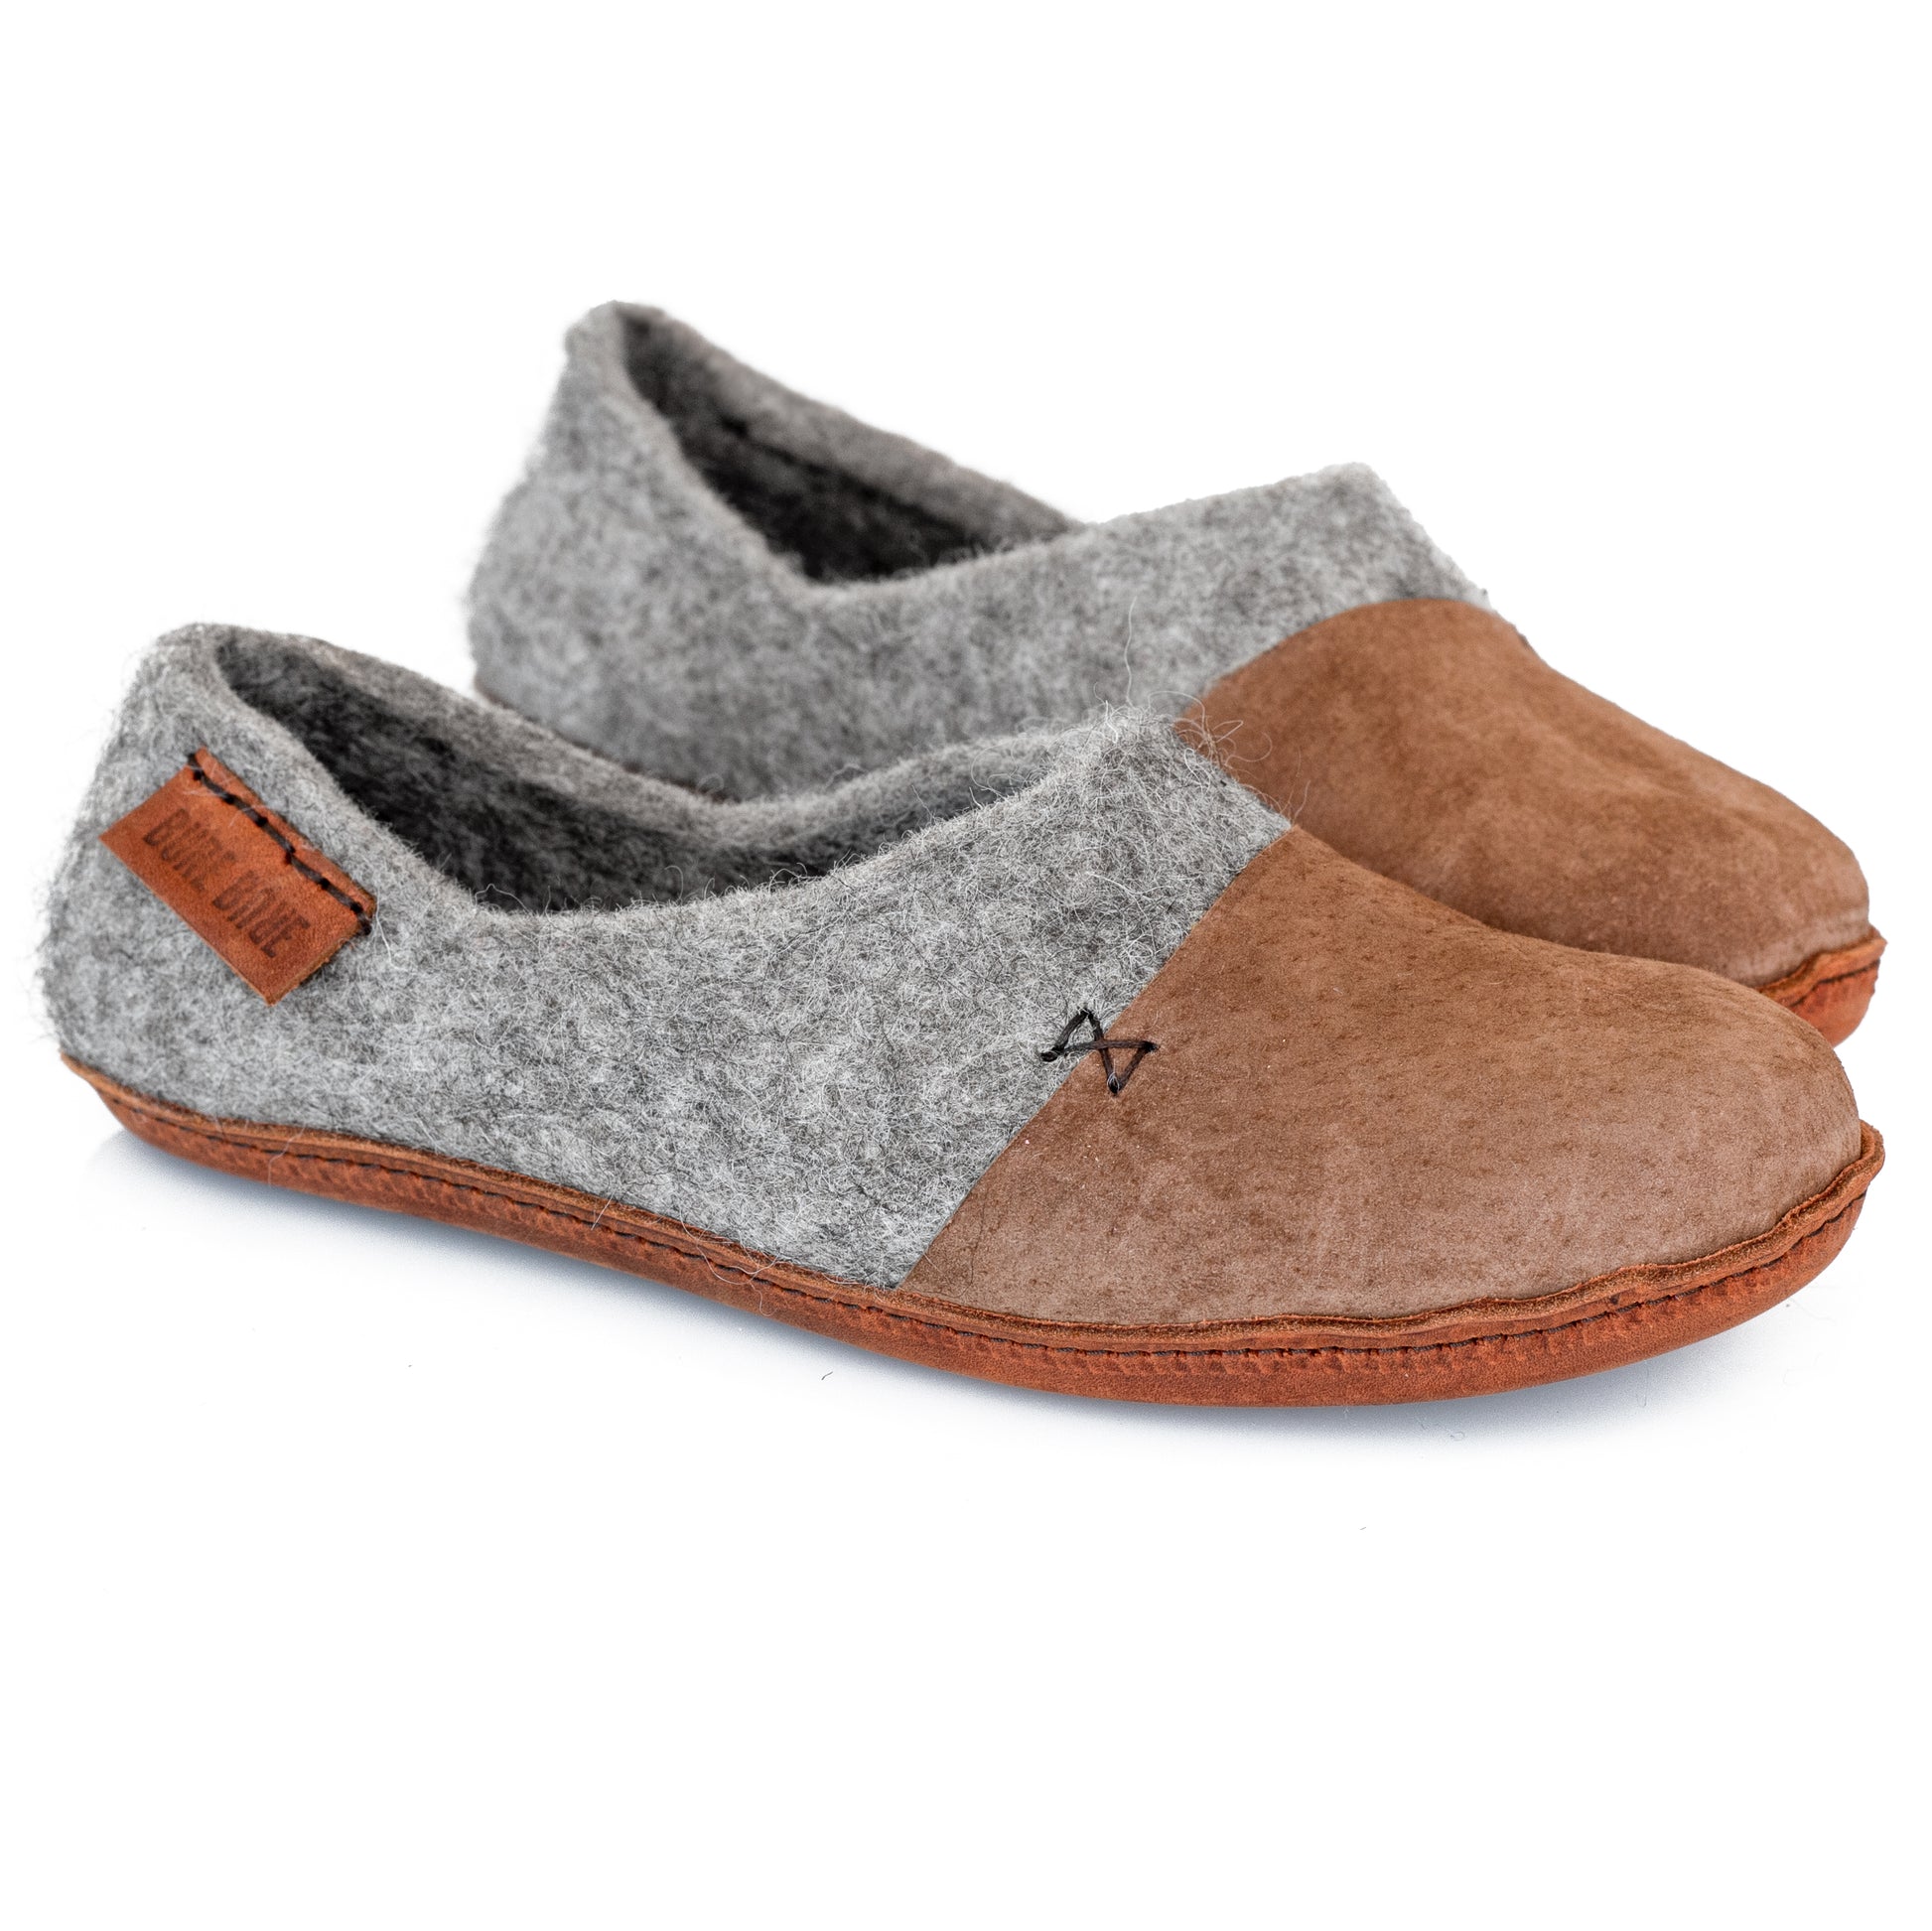 Suede and Wool Slippers for Men  from the Side, hand-stitched BureBure logo visible